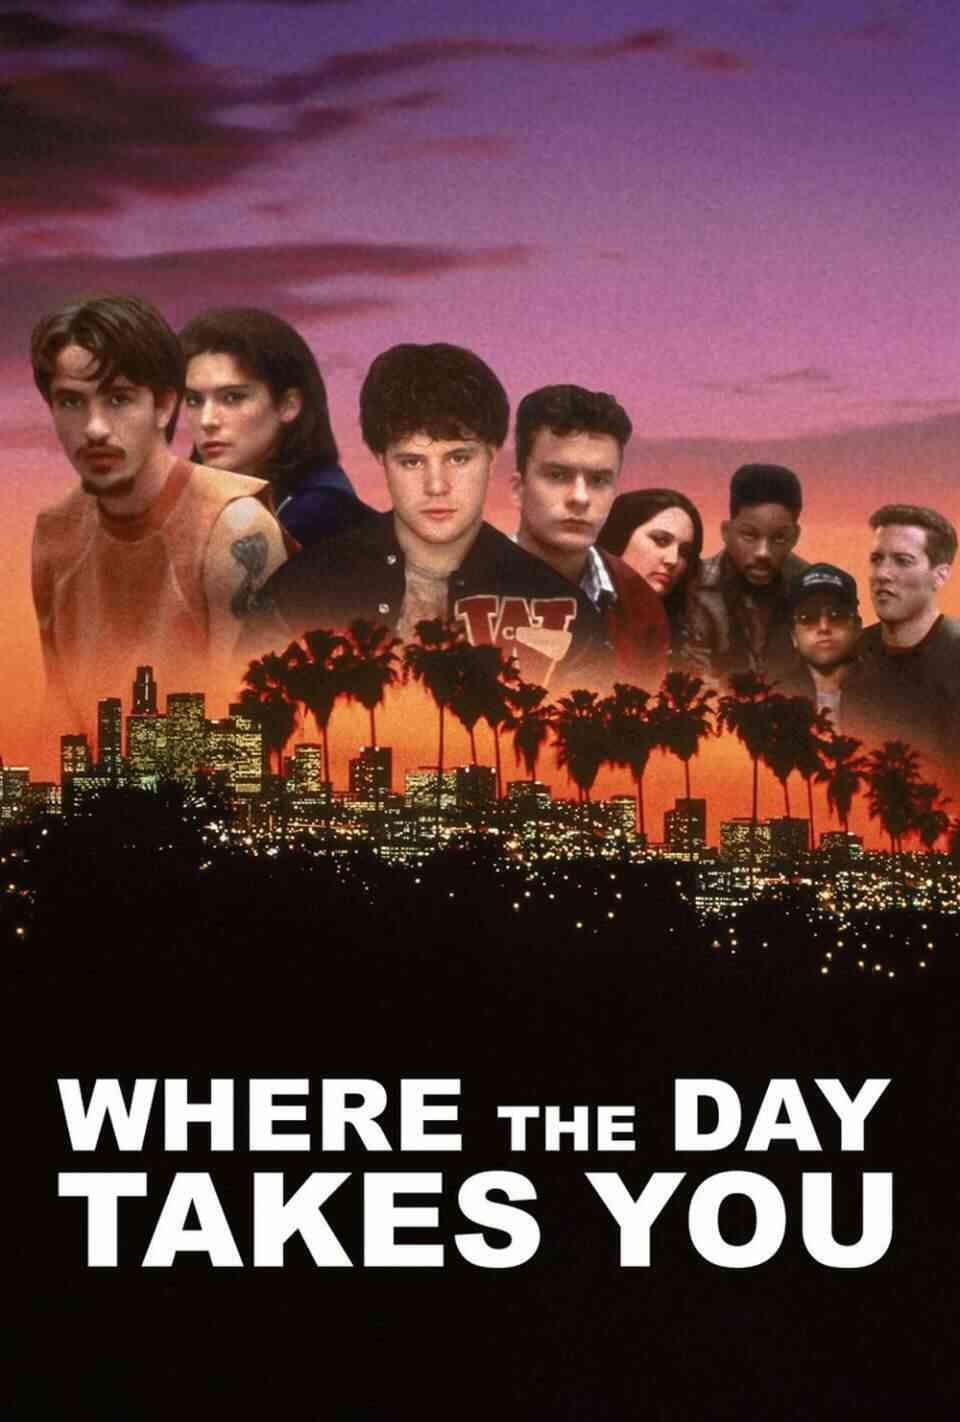 Read Where the Day Takes You screenplay (poster)